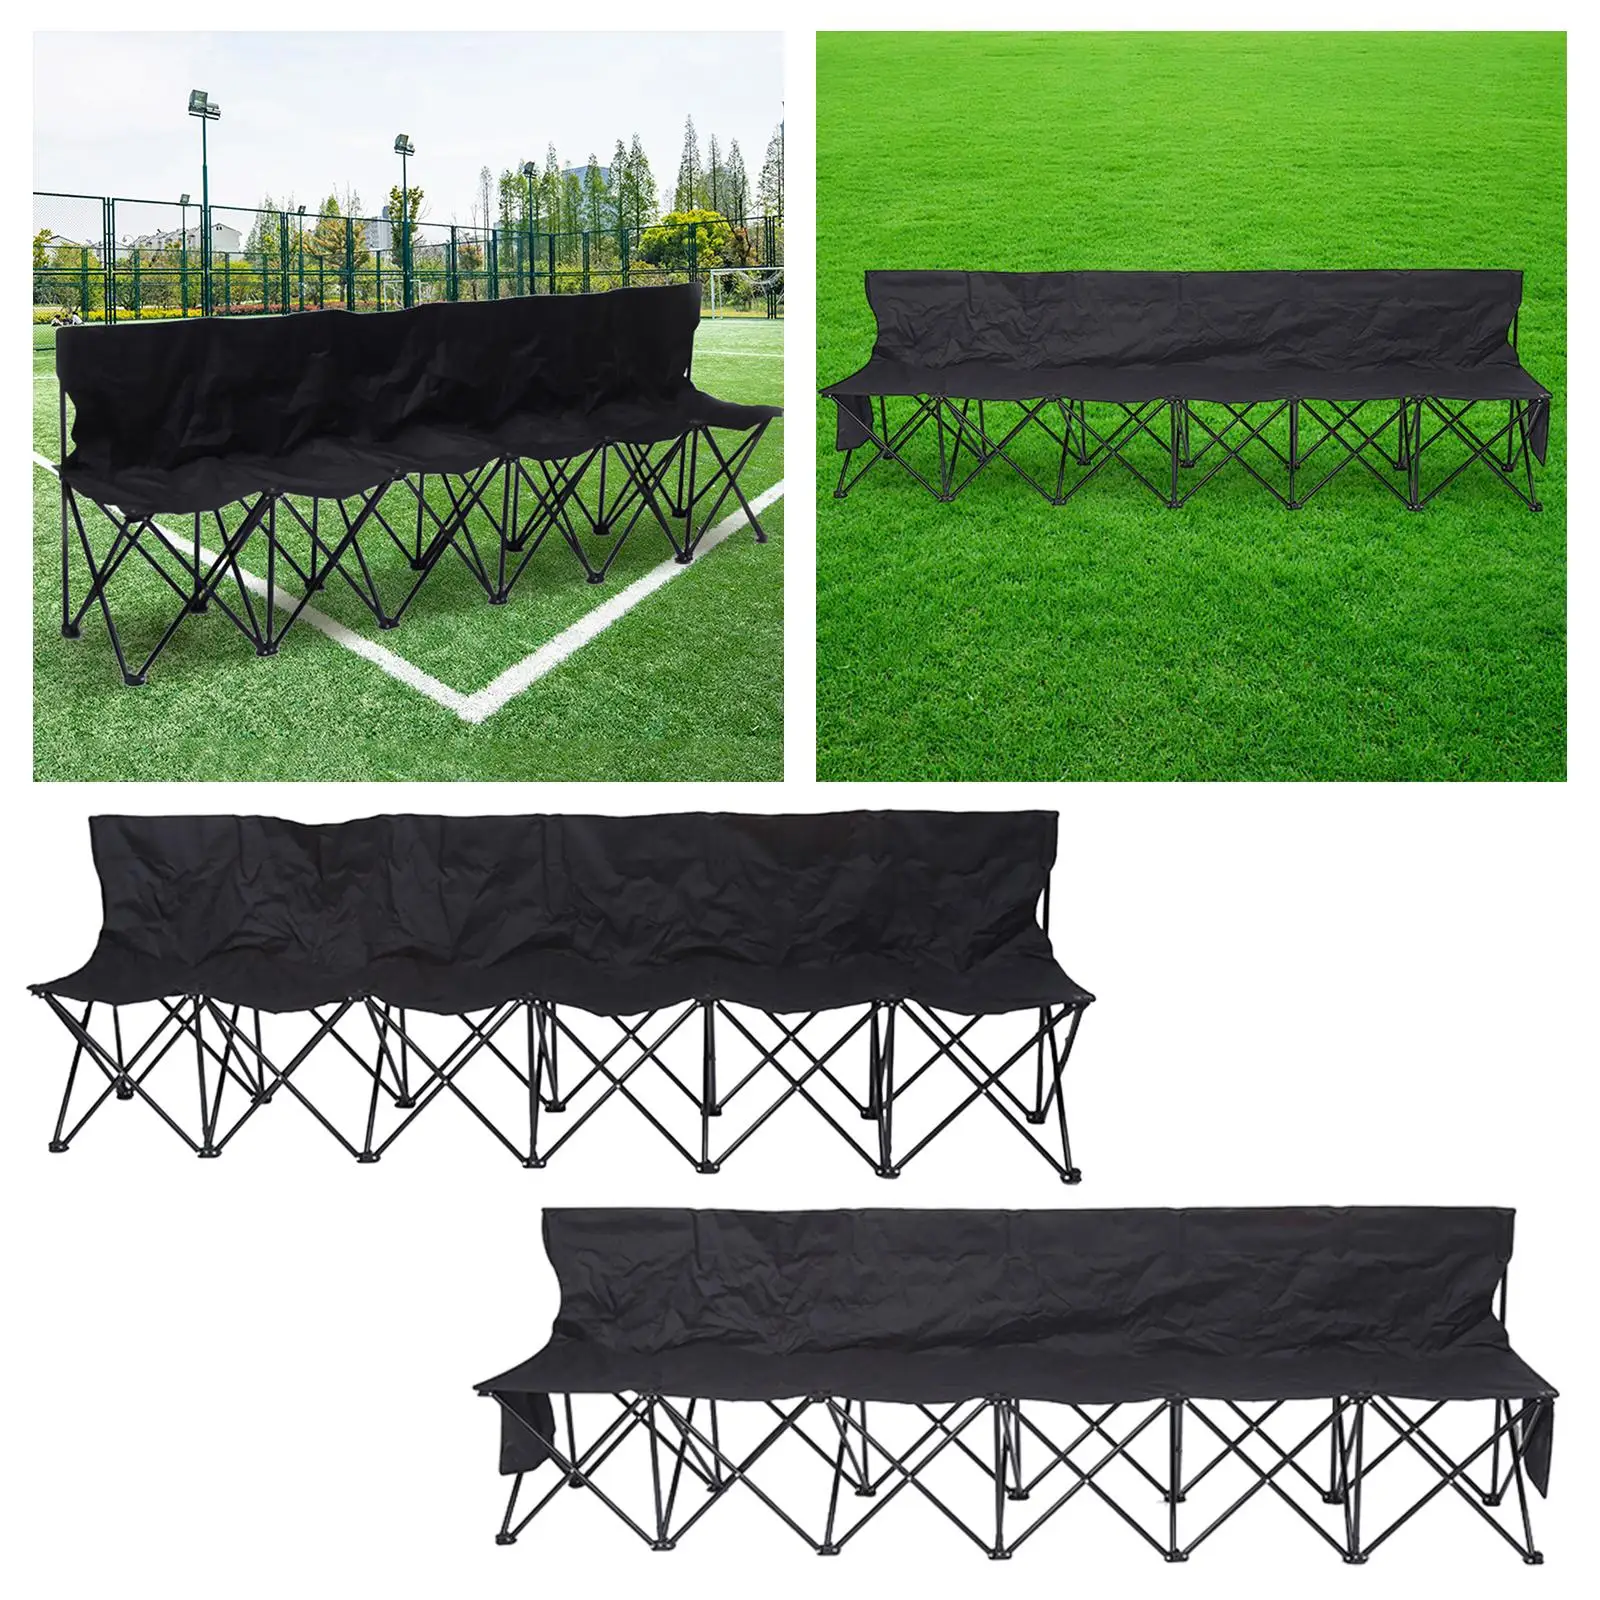 6 Person Foldable Camping Chair Seat Bench for Hiking Campsites Soccer